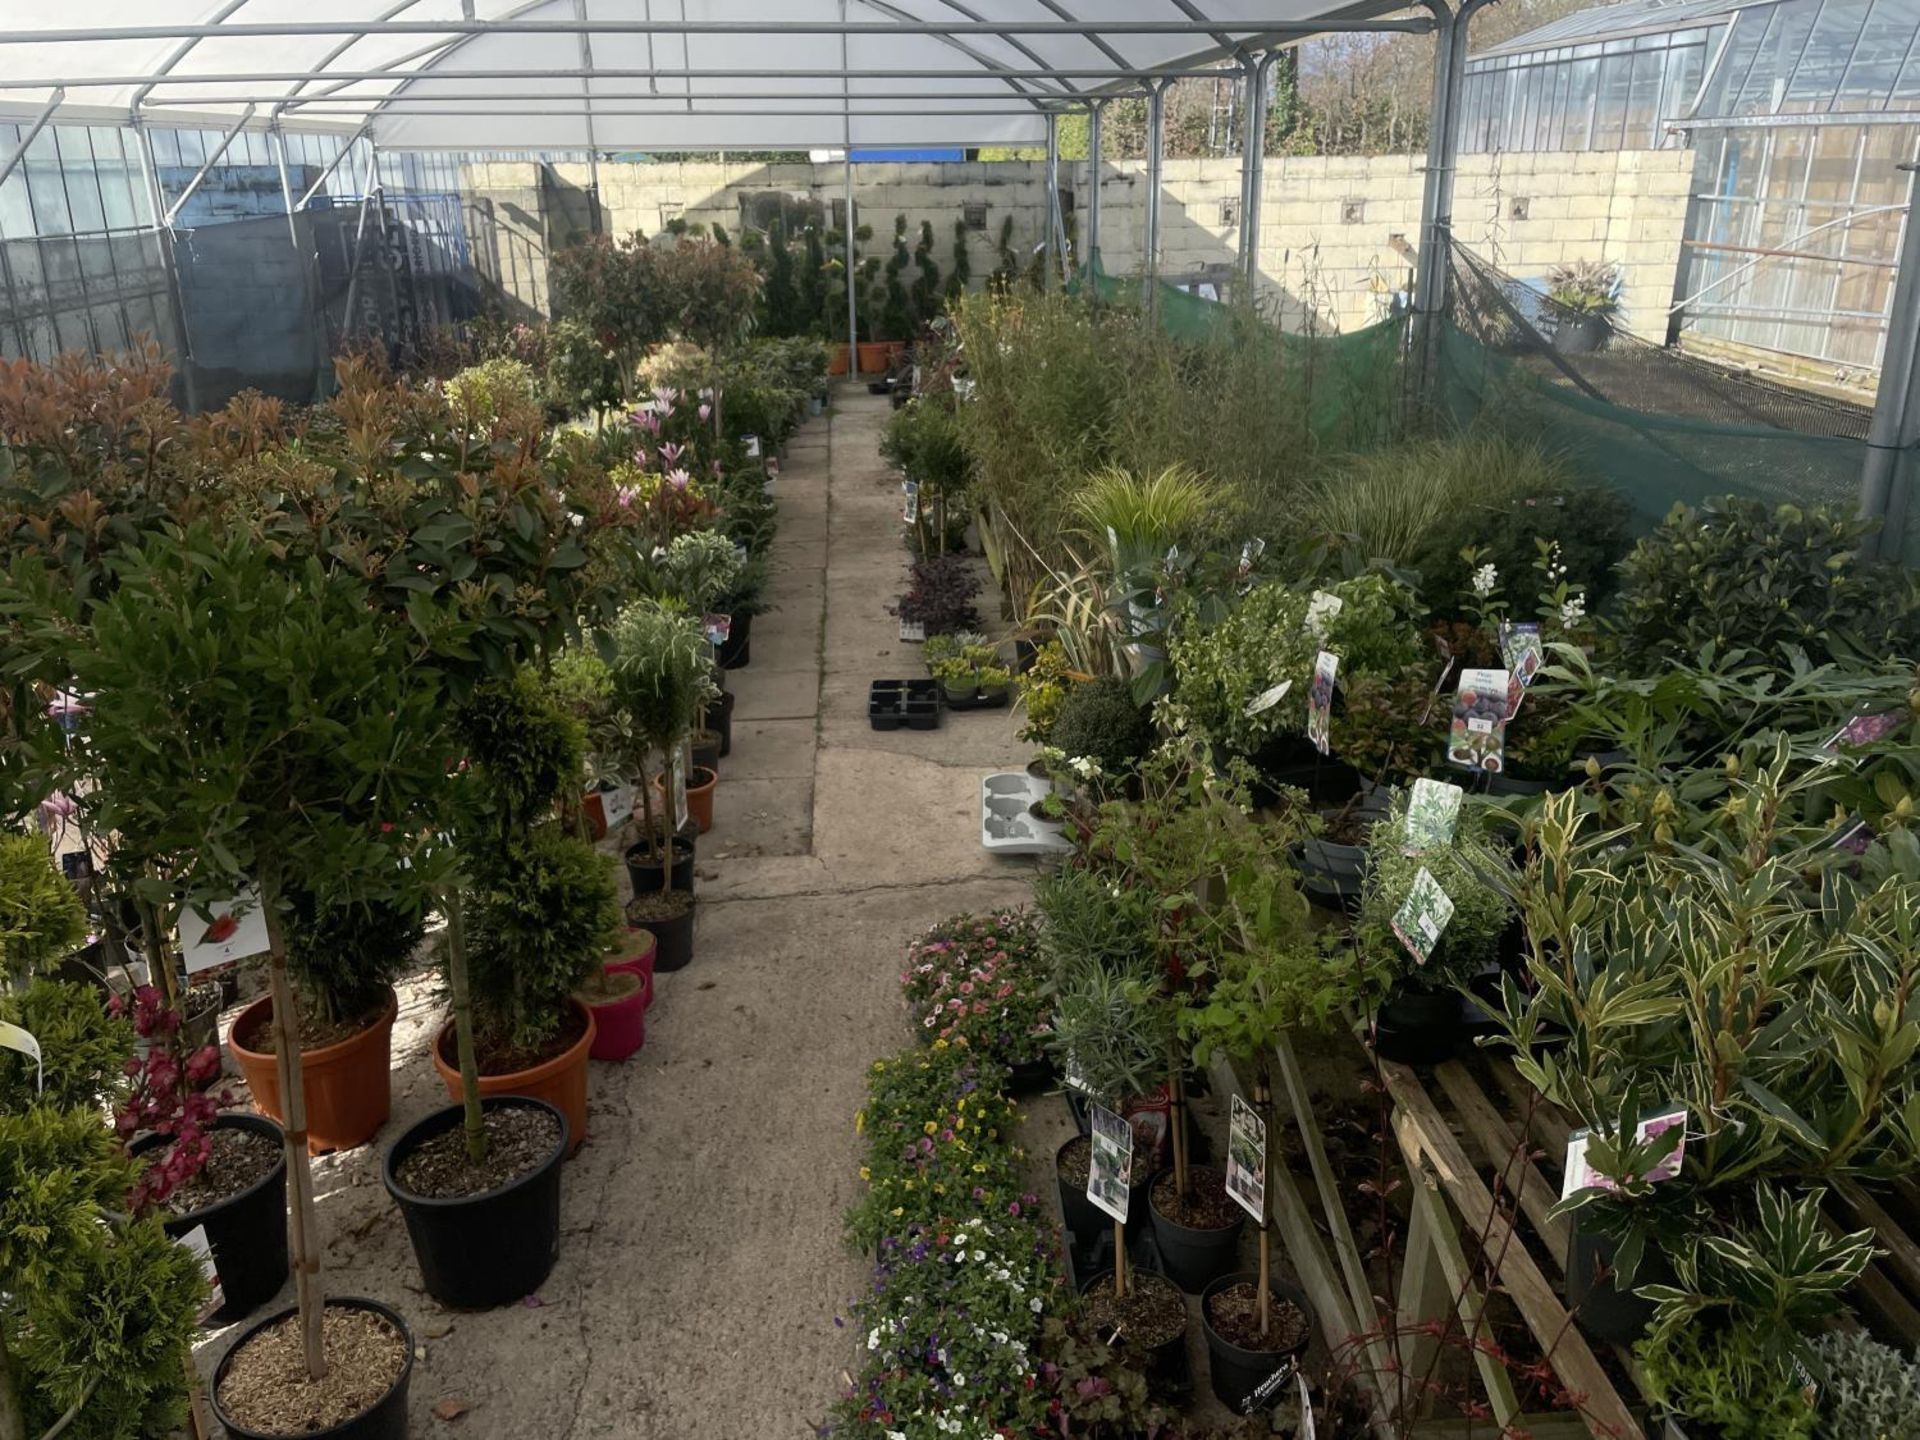 WELCOME TO ASHLEY WALLER HORTICULTURE AUCTION - LOTS ARE BEING ADDED DAILY - THE IMAGES SHOW LOTS - Image 13 of 51